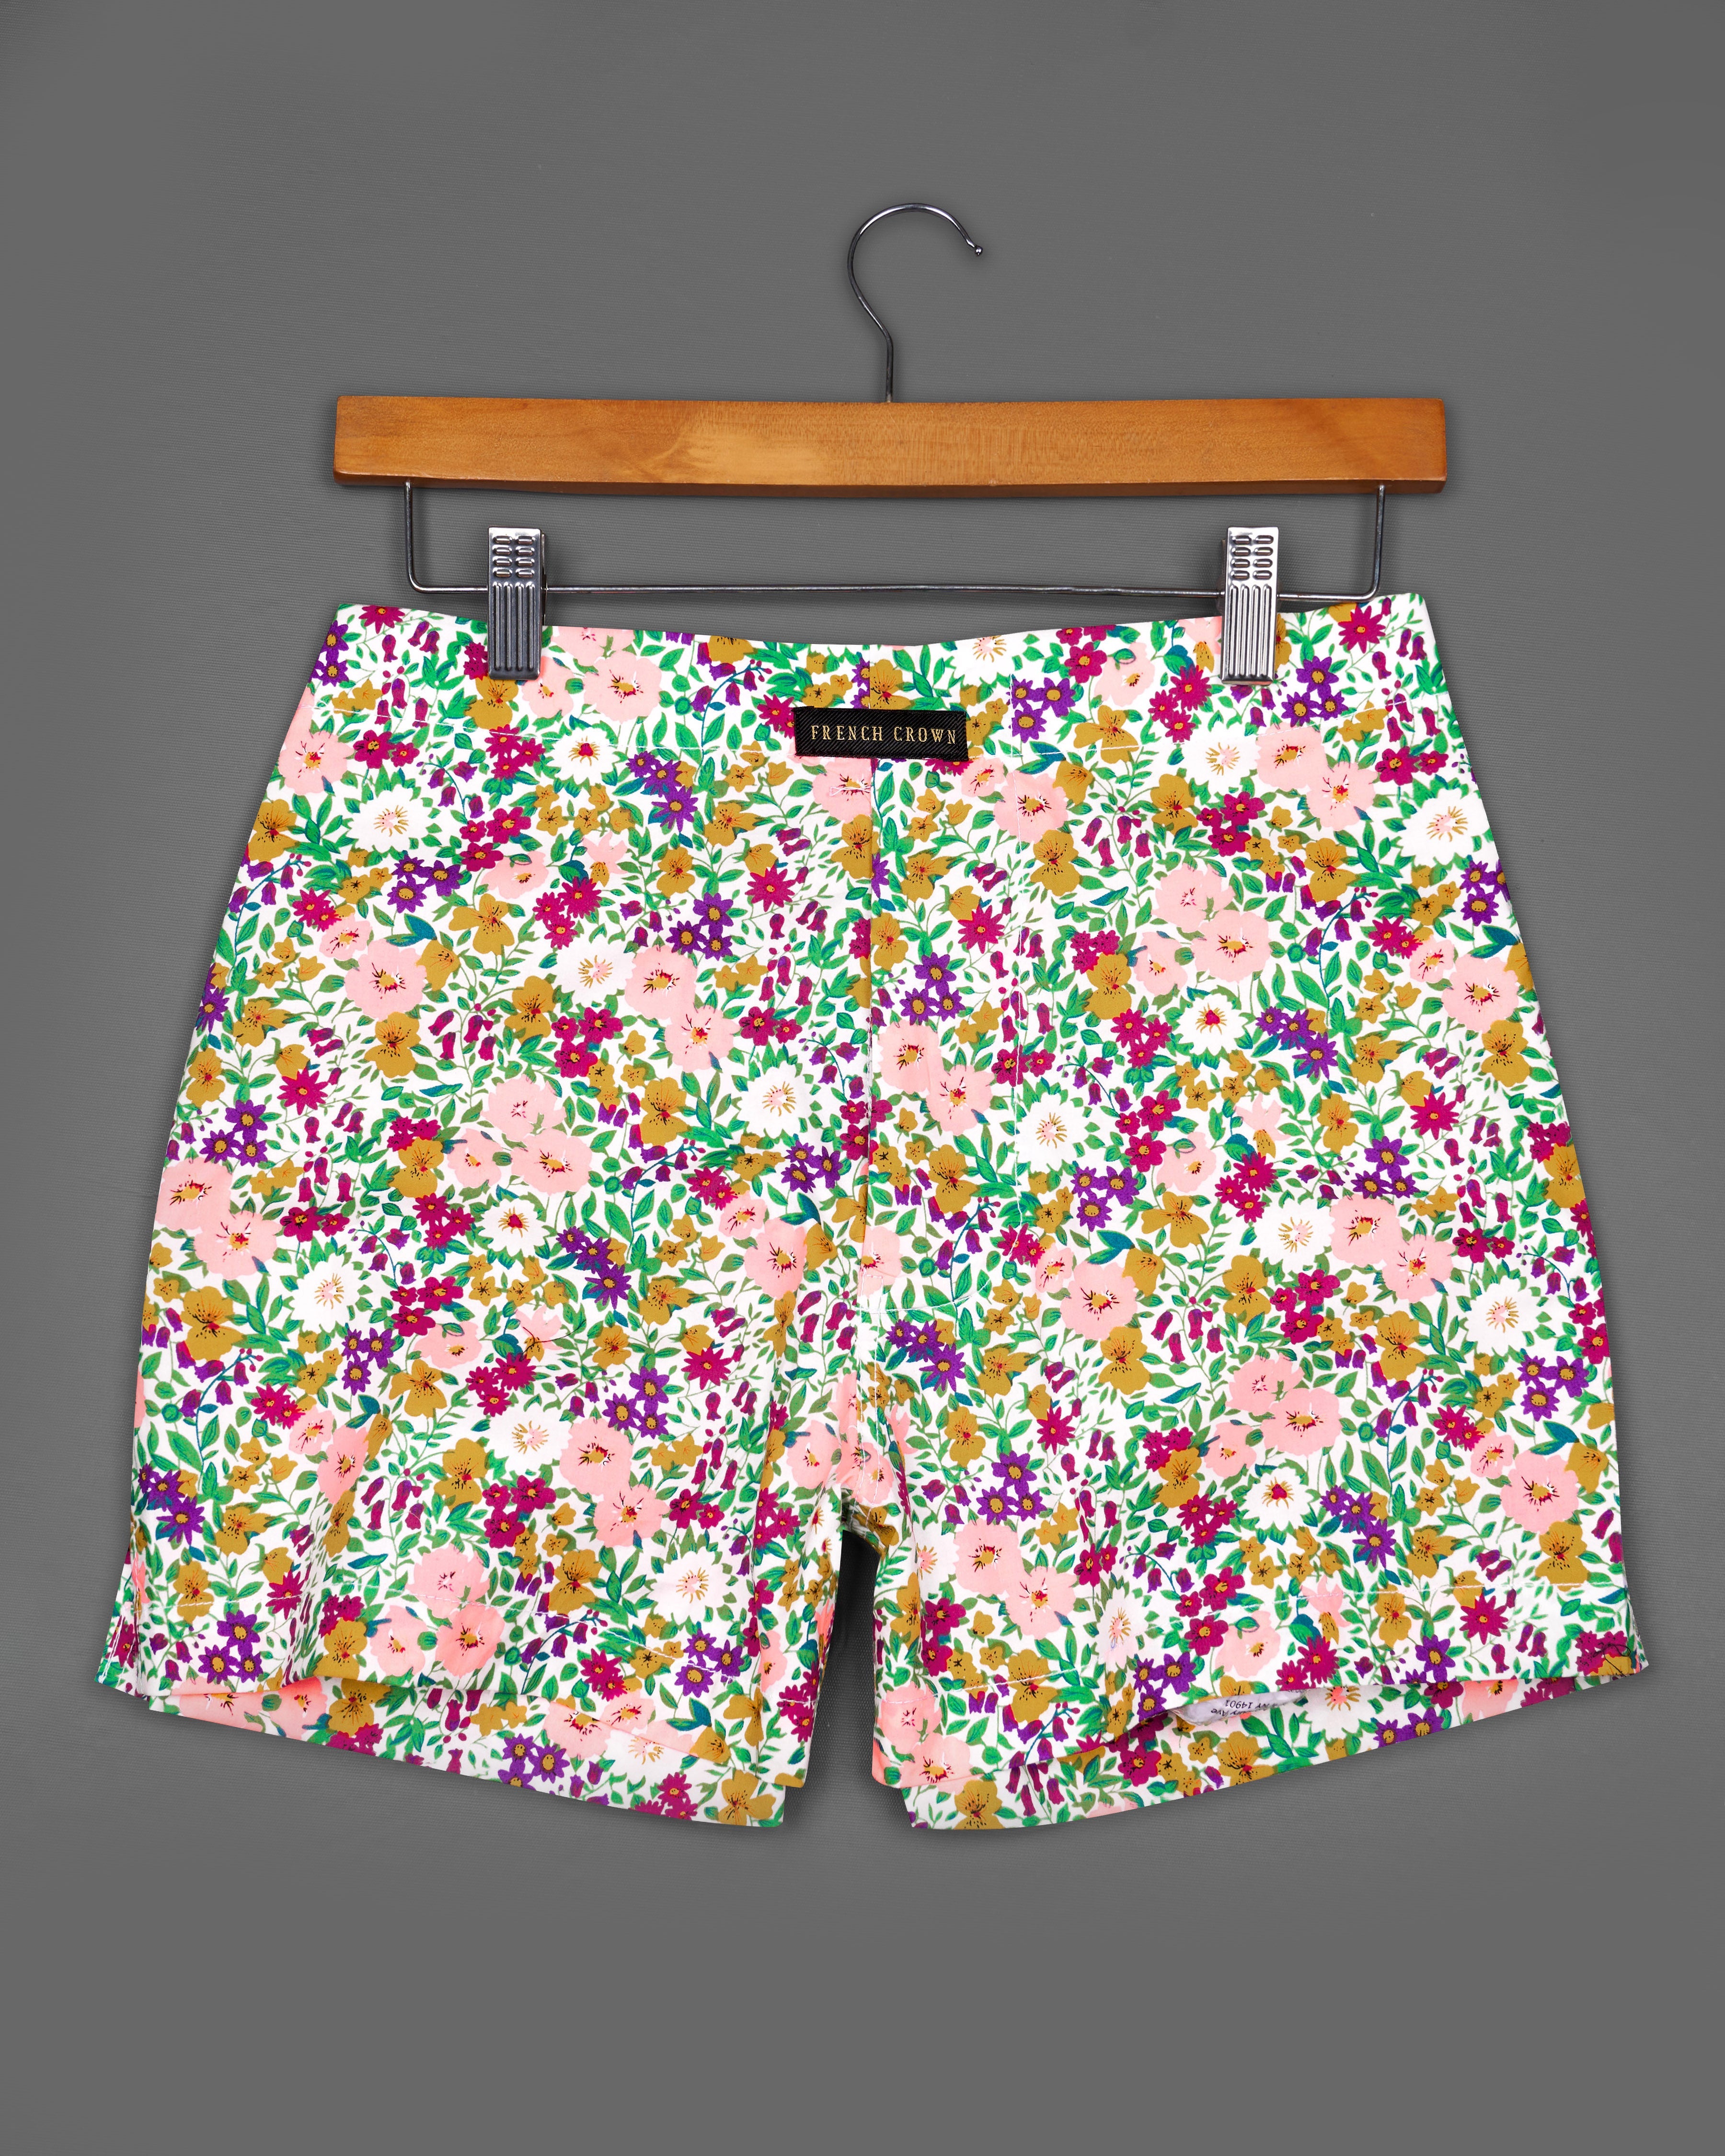 Bright White with Algae Green Tropical Printed Premium Cotton Boxers BX437-28, BX437-30, BX437-32, BX437-34, BX437-36, BX437-38, BX437-40, BX437-42, BX437-44